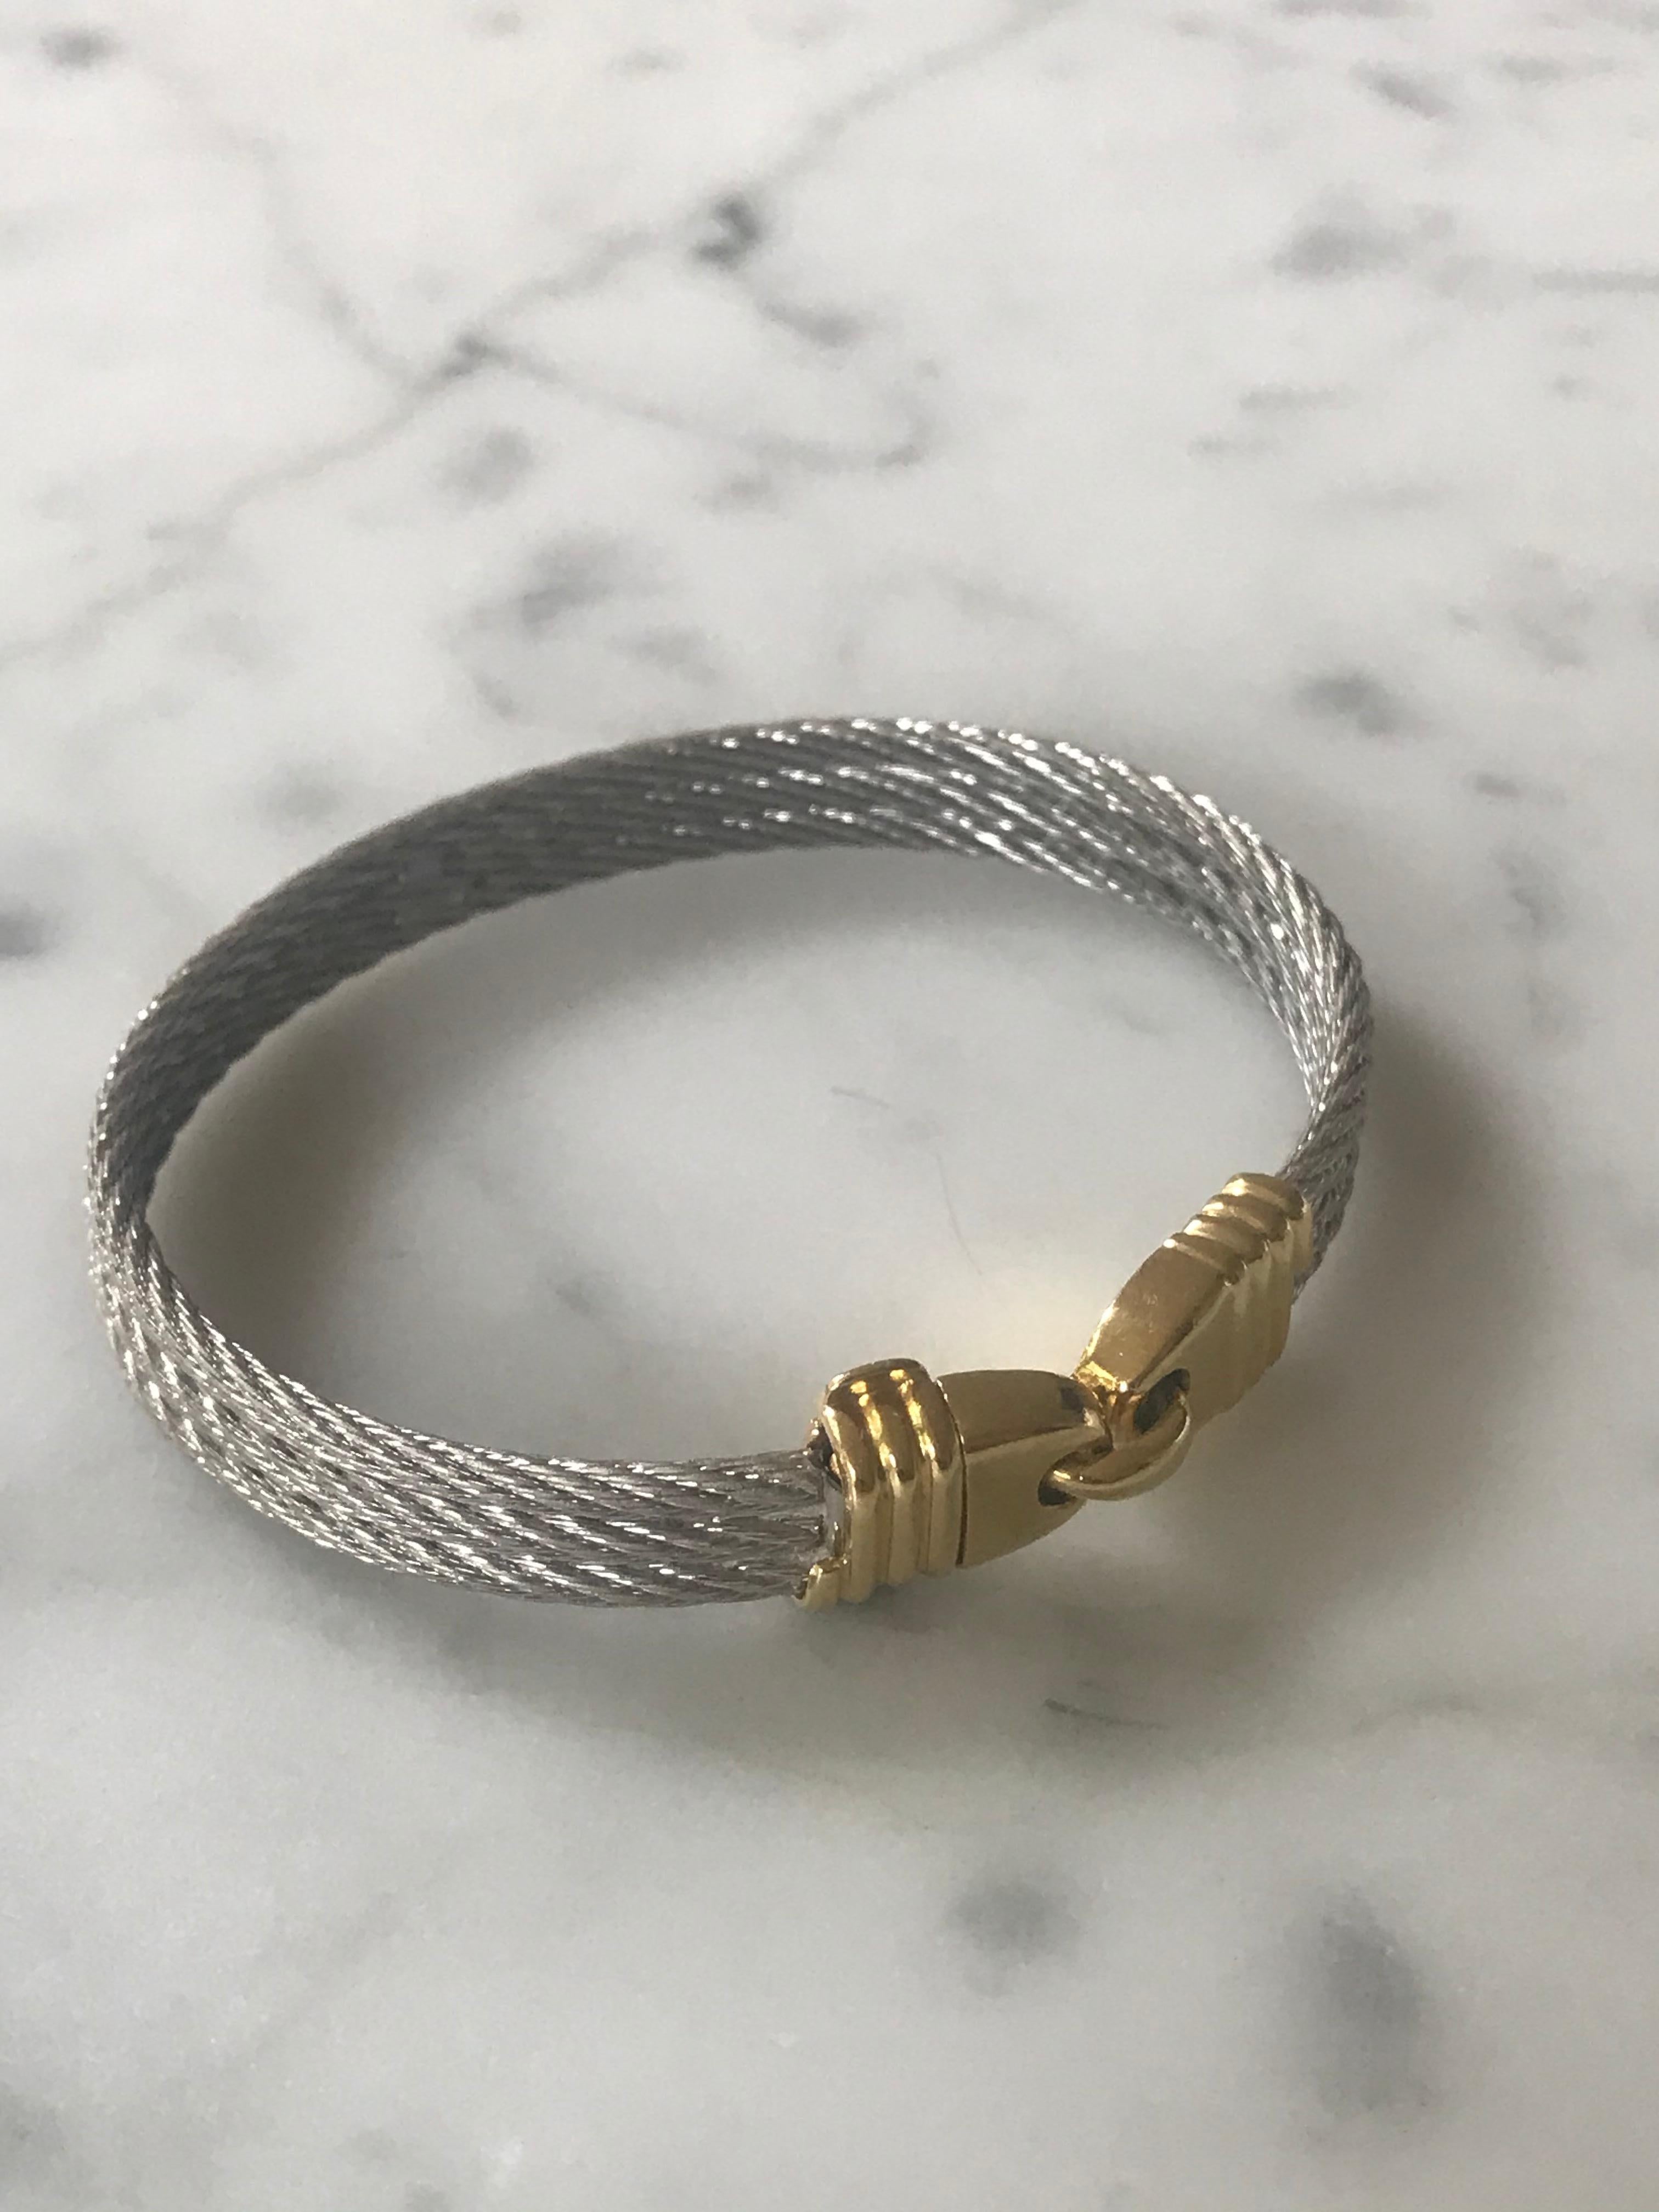 Contemporary Fred Paris Force 10 Sailing Bracelet in Steel and 18 Karat Yellow Gold, France